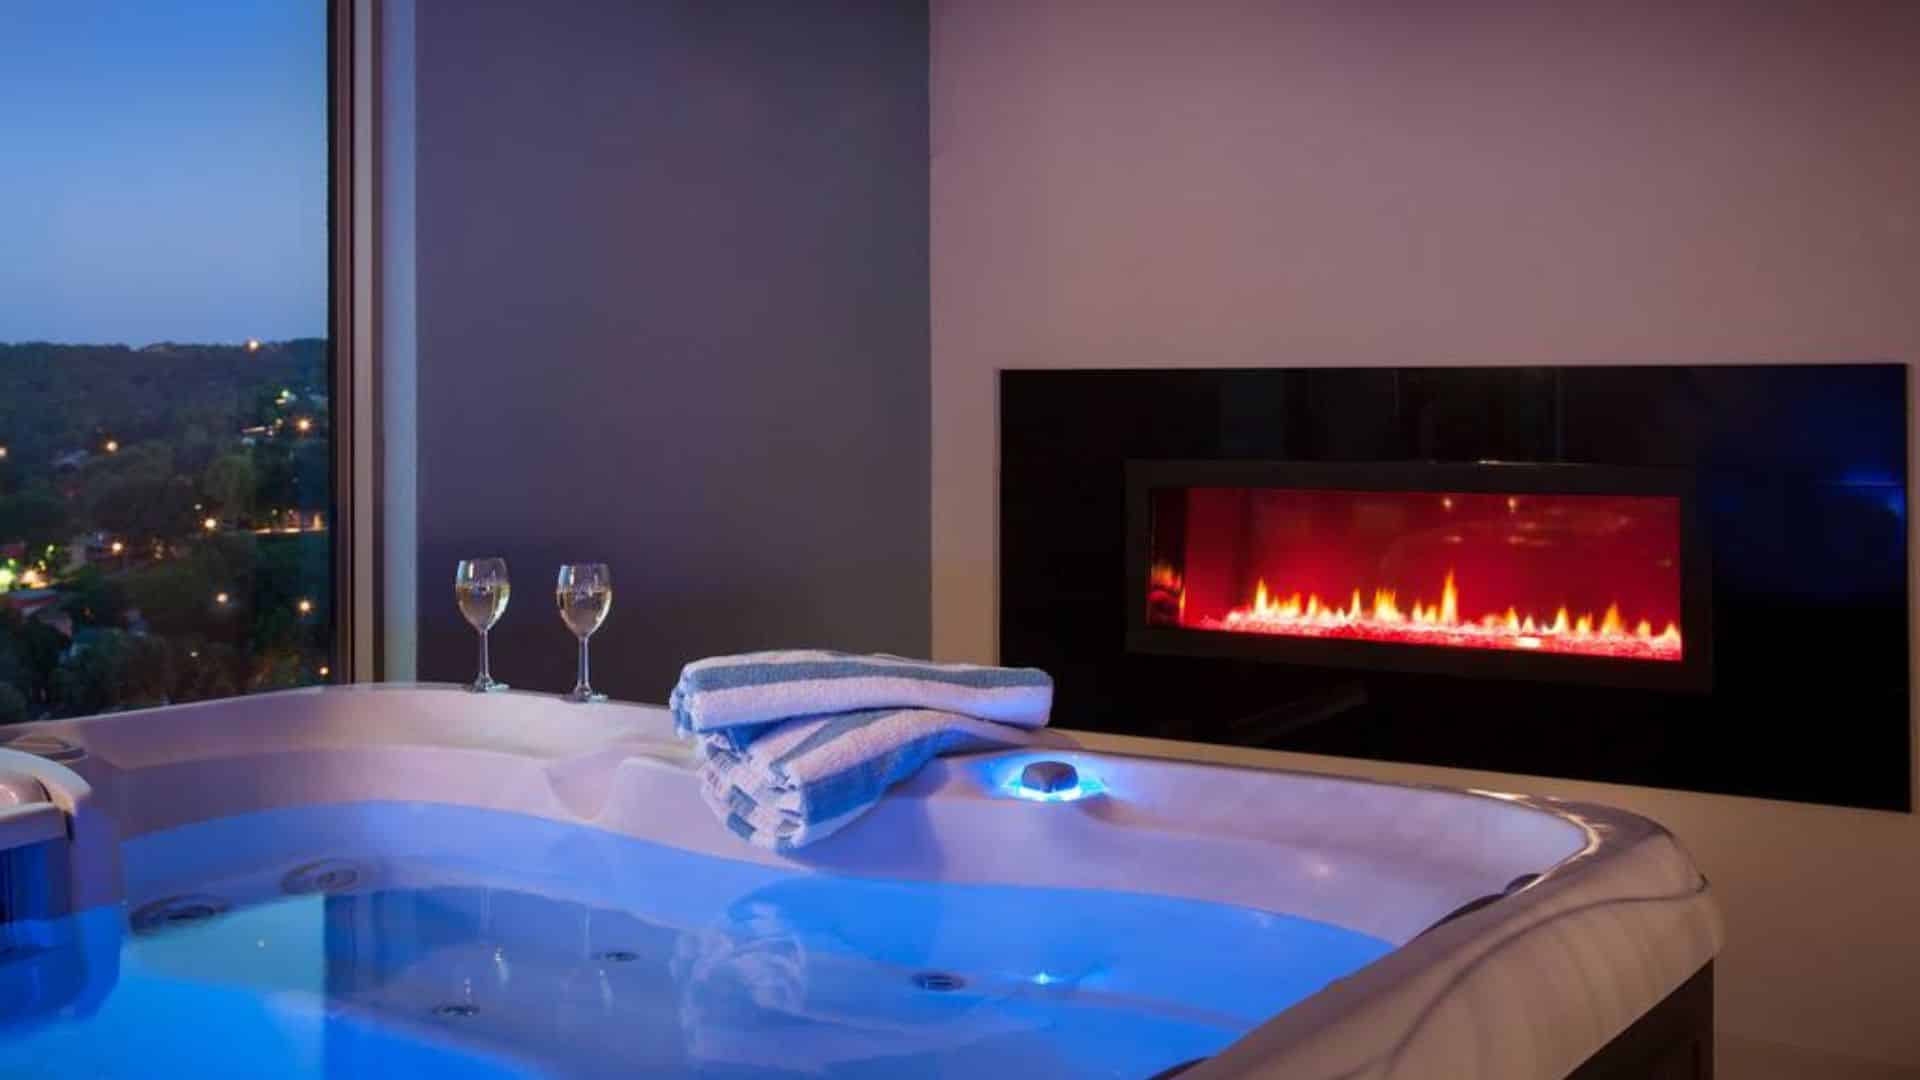 Jetted tub in front of a linear gas fireplace and a window overlooking the town of Hermann at night.